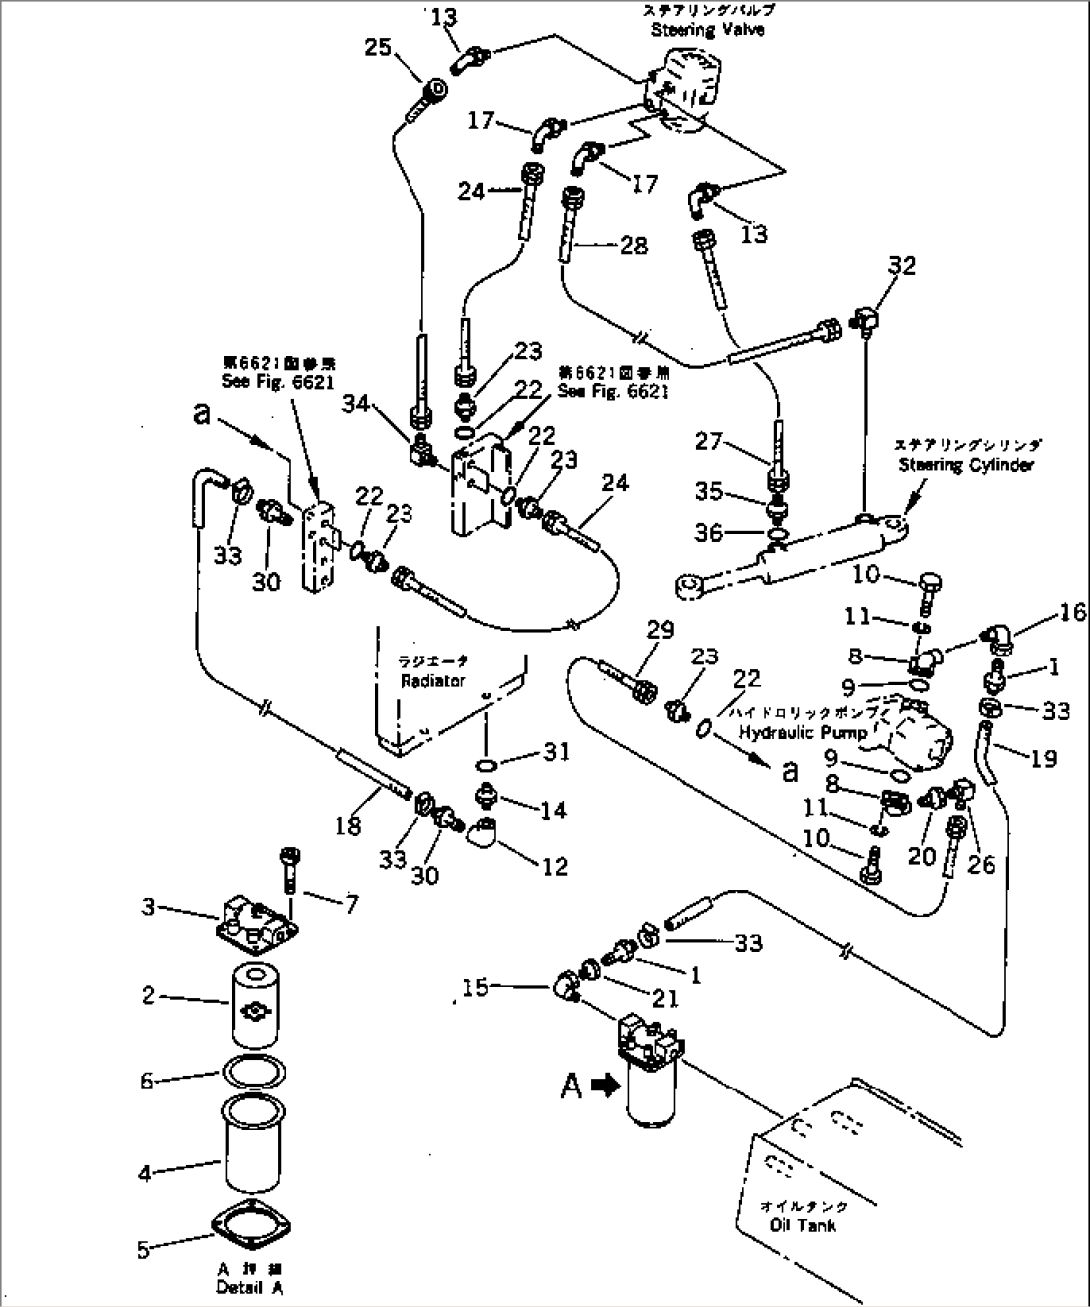 STEERING PIPING(#2101-)